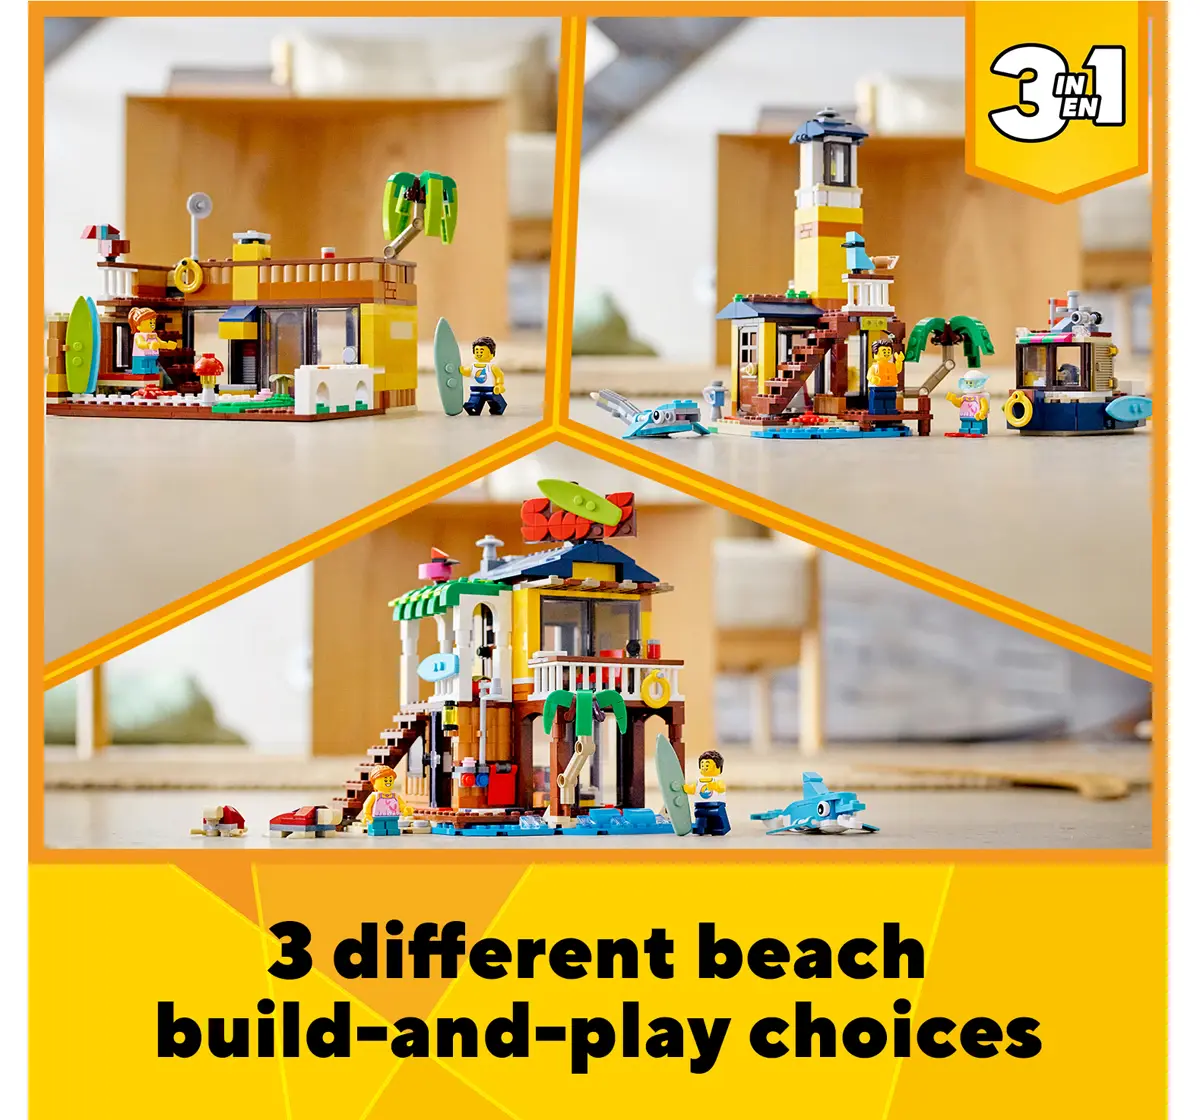 Creator 3in1 Surfer Beach House Building Kit by Lego Featuring Beach Hut and Animal Toys (564 Pieces)